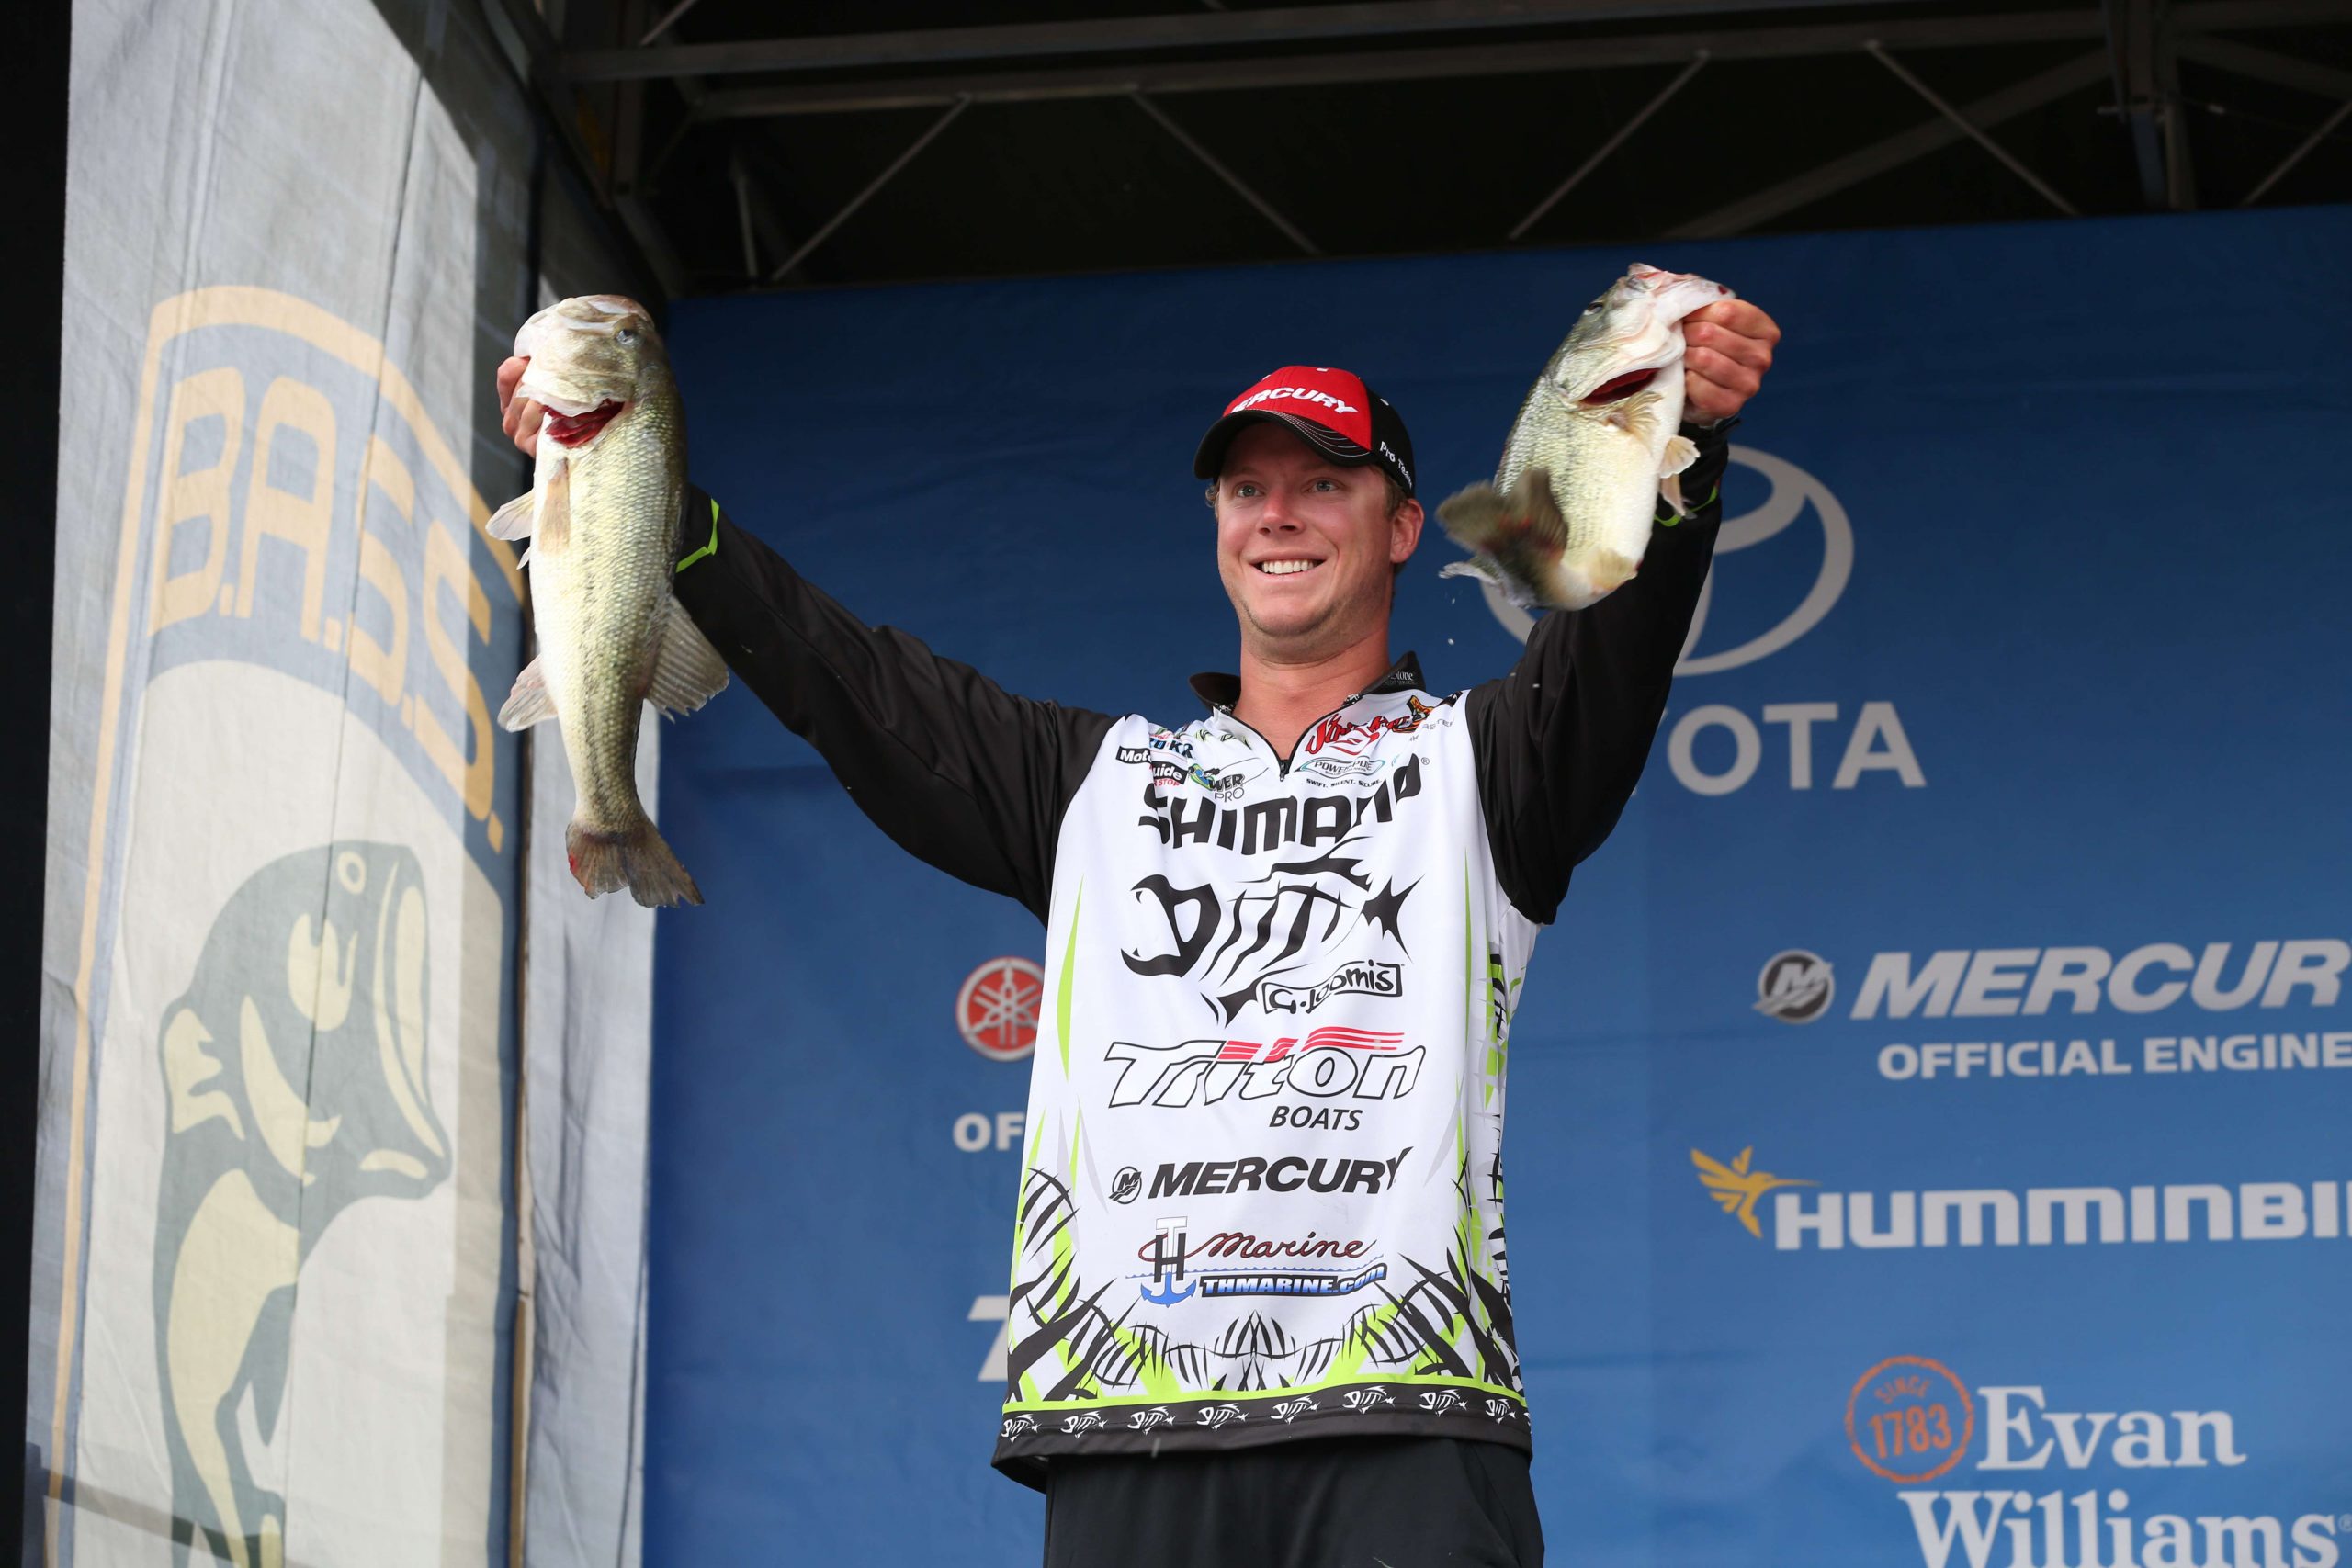 Jonathon VanDam comes from one of the most famous families in bass fishing. In fact, if bass fishing families were equal to politics, the VanDam's would be akin to the Kennedys for popularity and influence. But, don't let the fact that he comes with a name make you think he rests on his laurels. JVD, as he has come to be known has written his own credentials and built his place in the sport as well. The 25-year-old Kalamazoo, Mich., pro has earned two B.A.S.S. wins and qualified for two trips to the Bassmaster Classic in his young career. JVD does share some common traits with his famous uncle; he likes to fish hard and fast; here are his five favorite baits for summer.